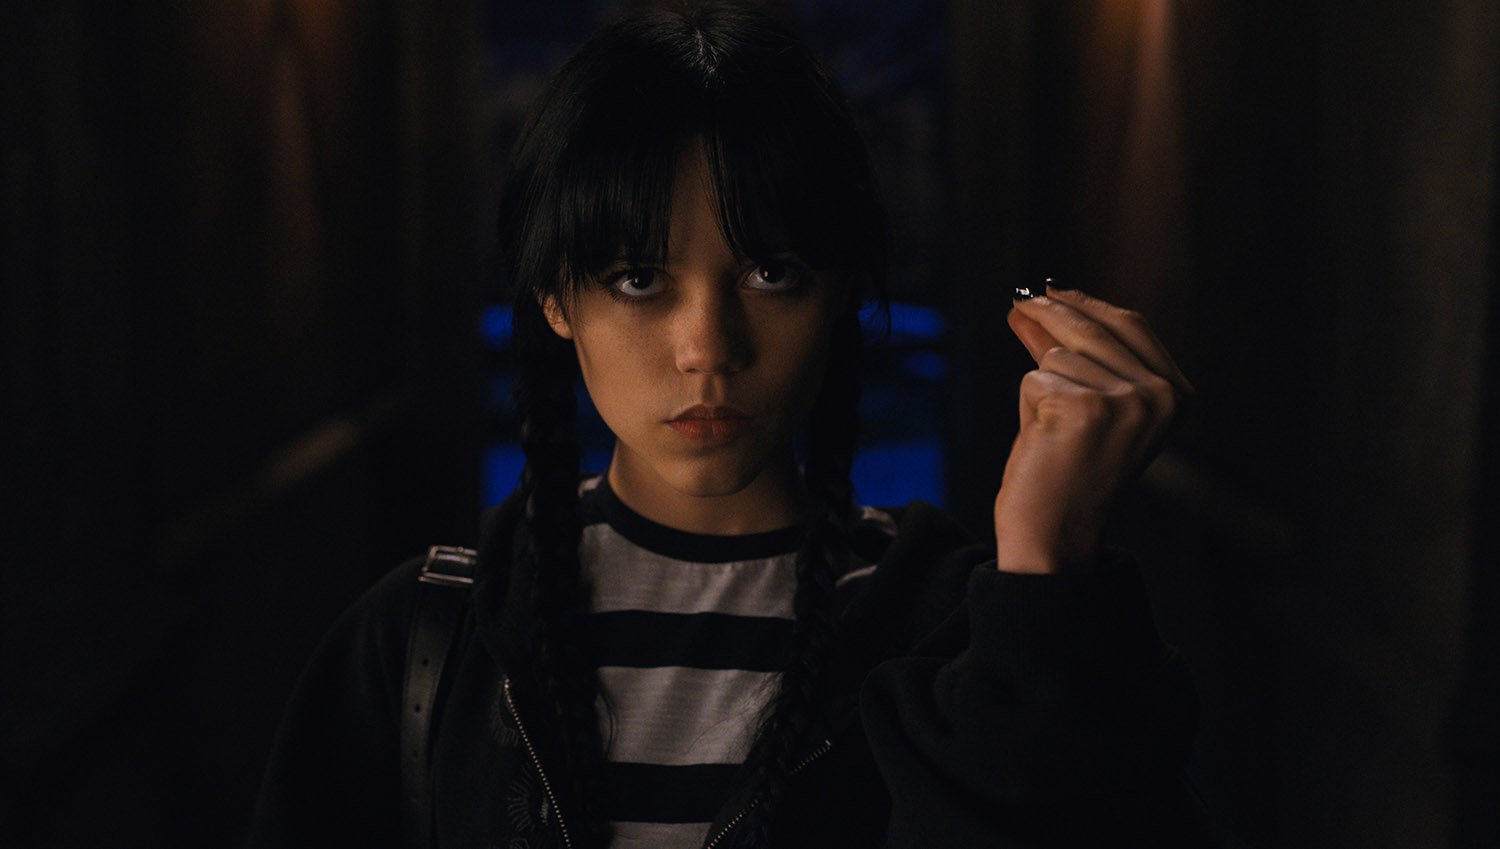 Wednesday Season 1 loose ends: A close-up shot of Jenna Ortega as Wednesday Addams snapping her fingers while wearing a white and black striped top.